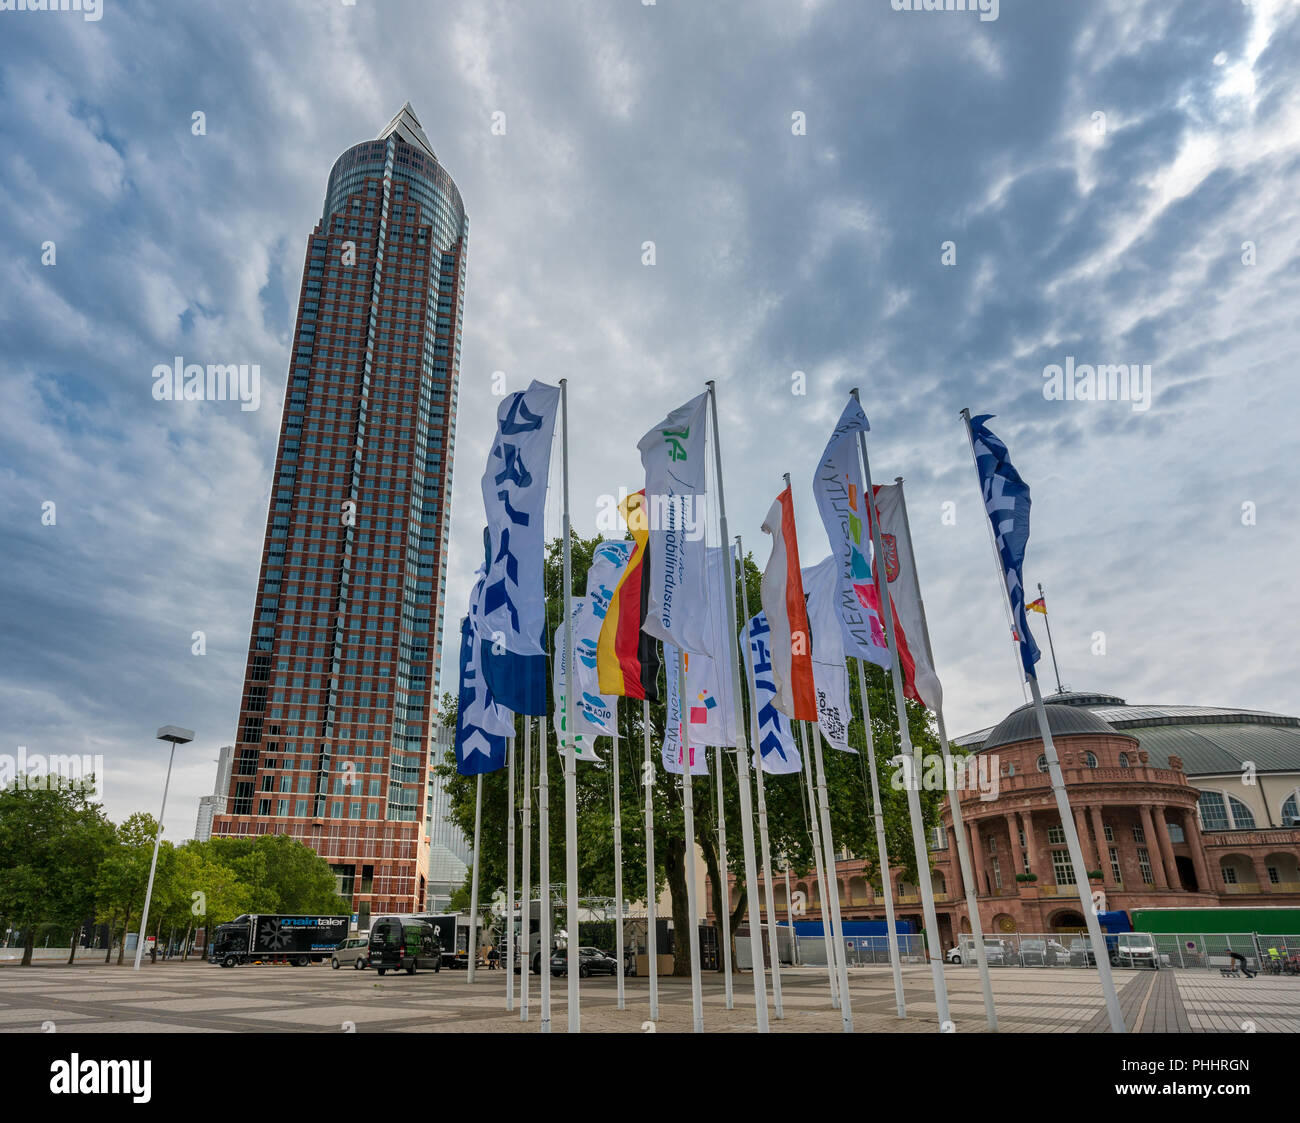 Flagpoles in front of the fairgrounds in Frankfurt am Main Stock Photo